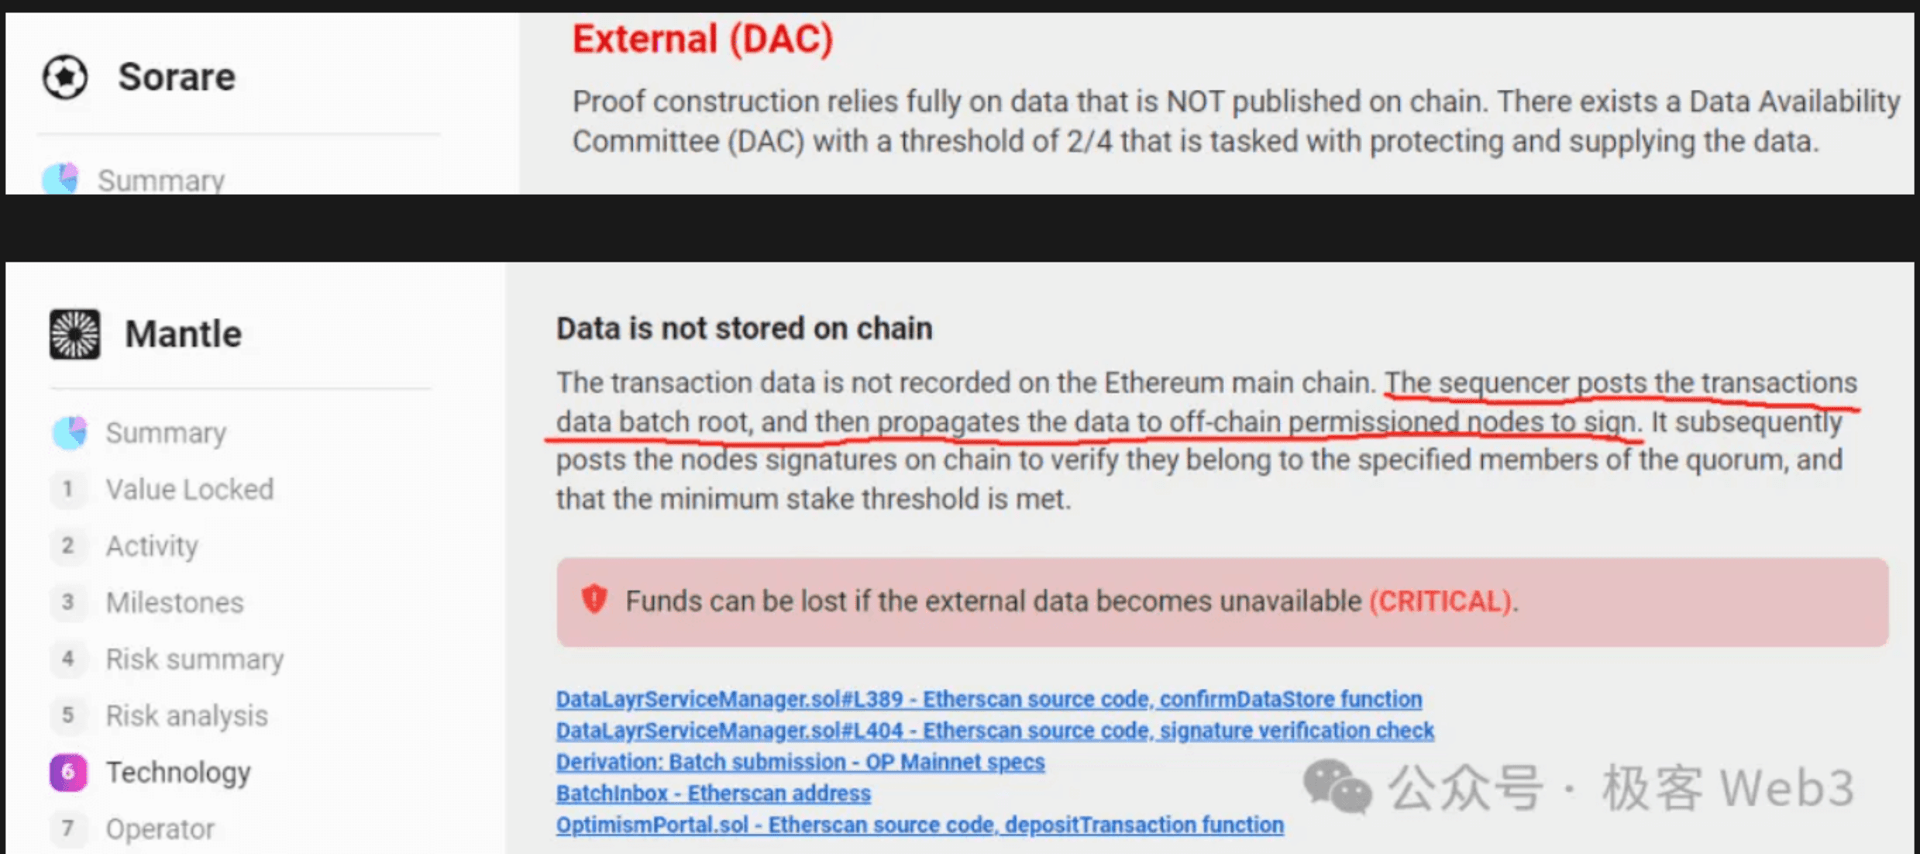 Data Availability Committee (DAC)